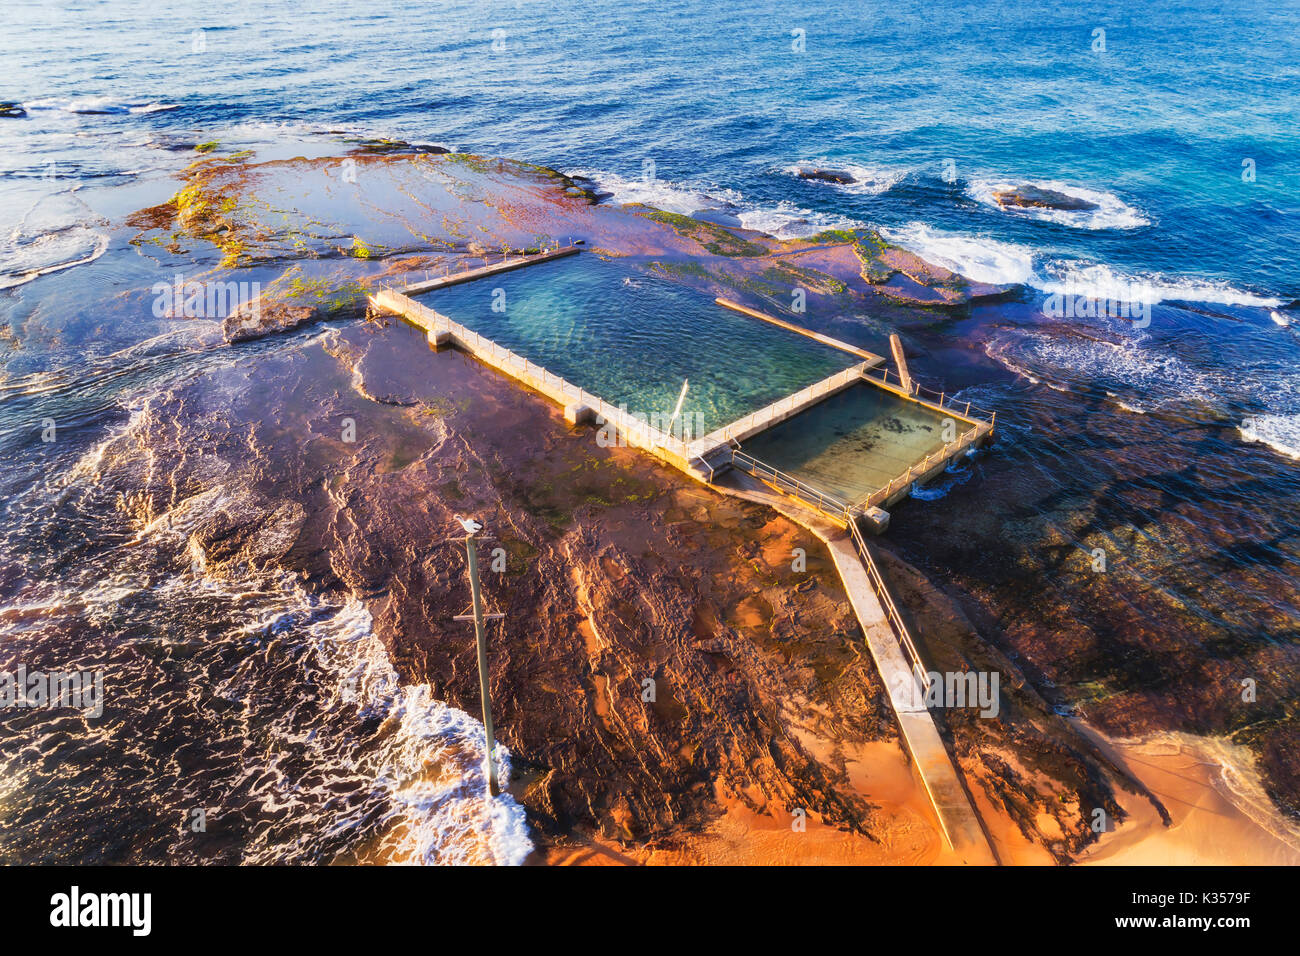 Remote isolated rock pool off Mona Vale beach at high tide with swimmer breaking waves of Pacific ocean coast in Sydney. Stock Photo